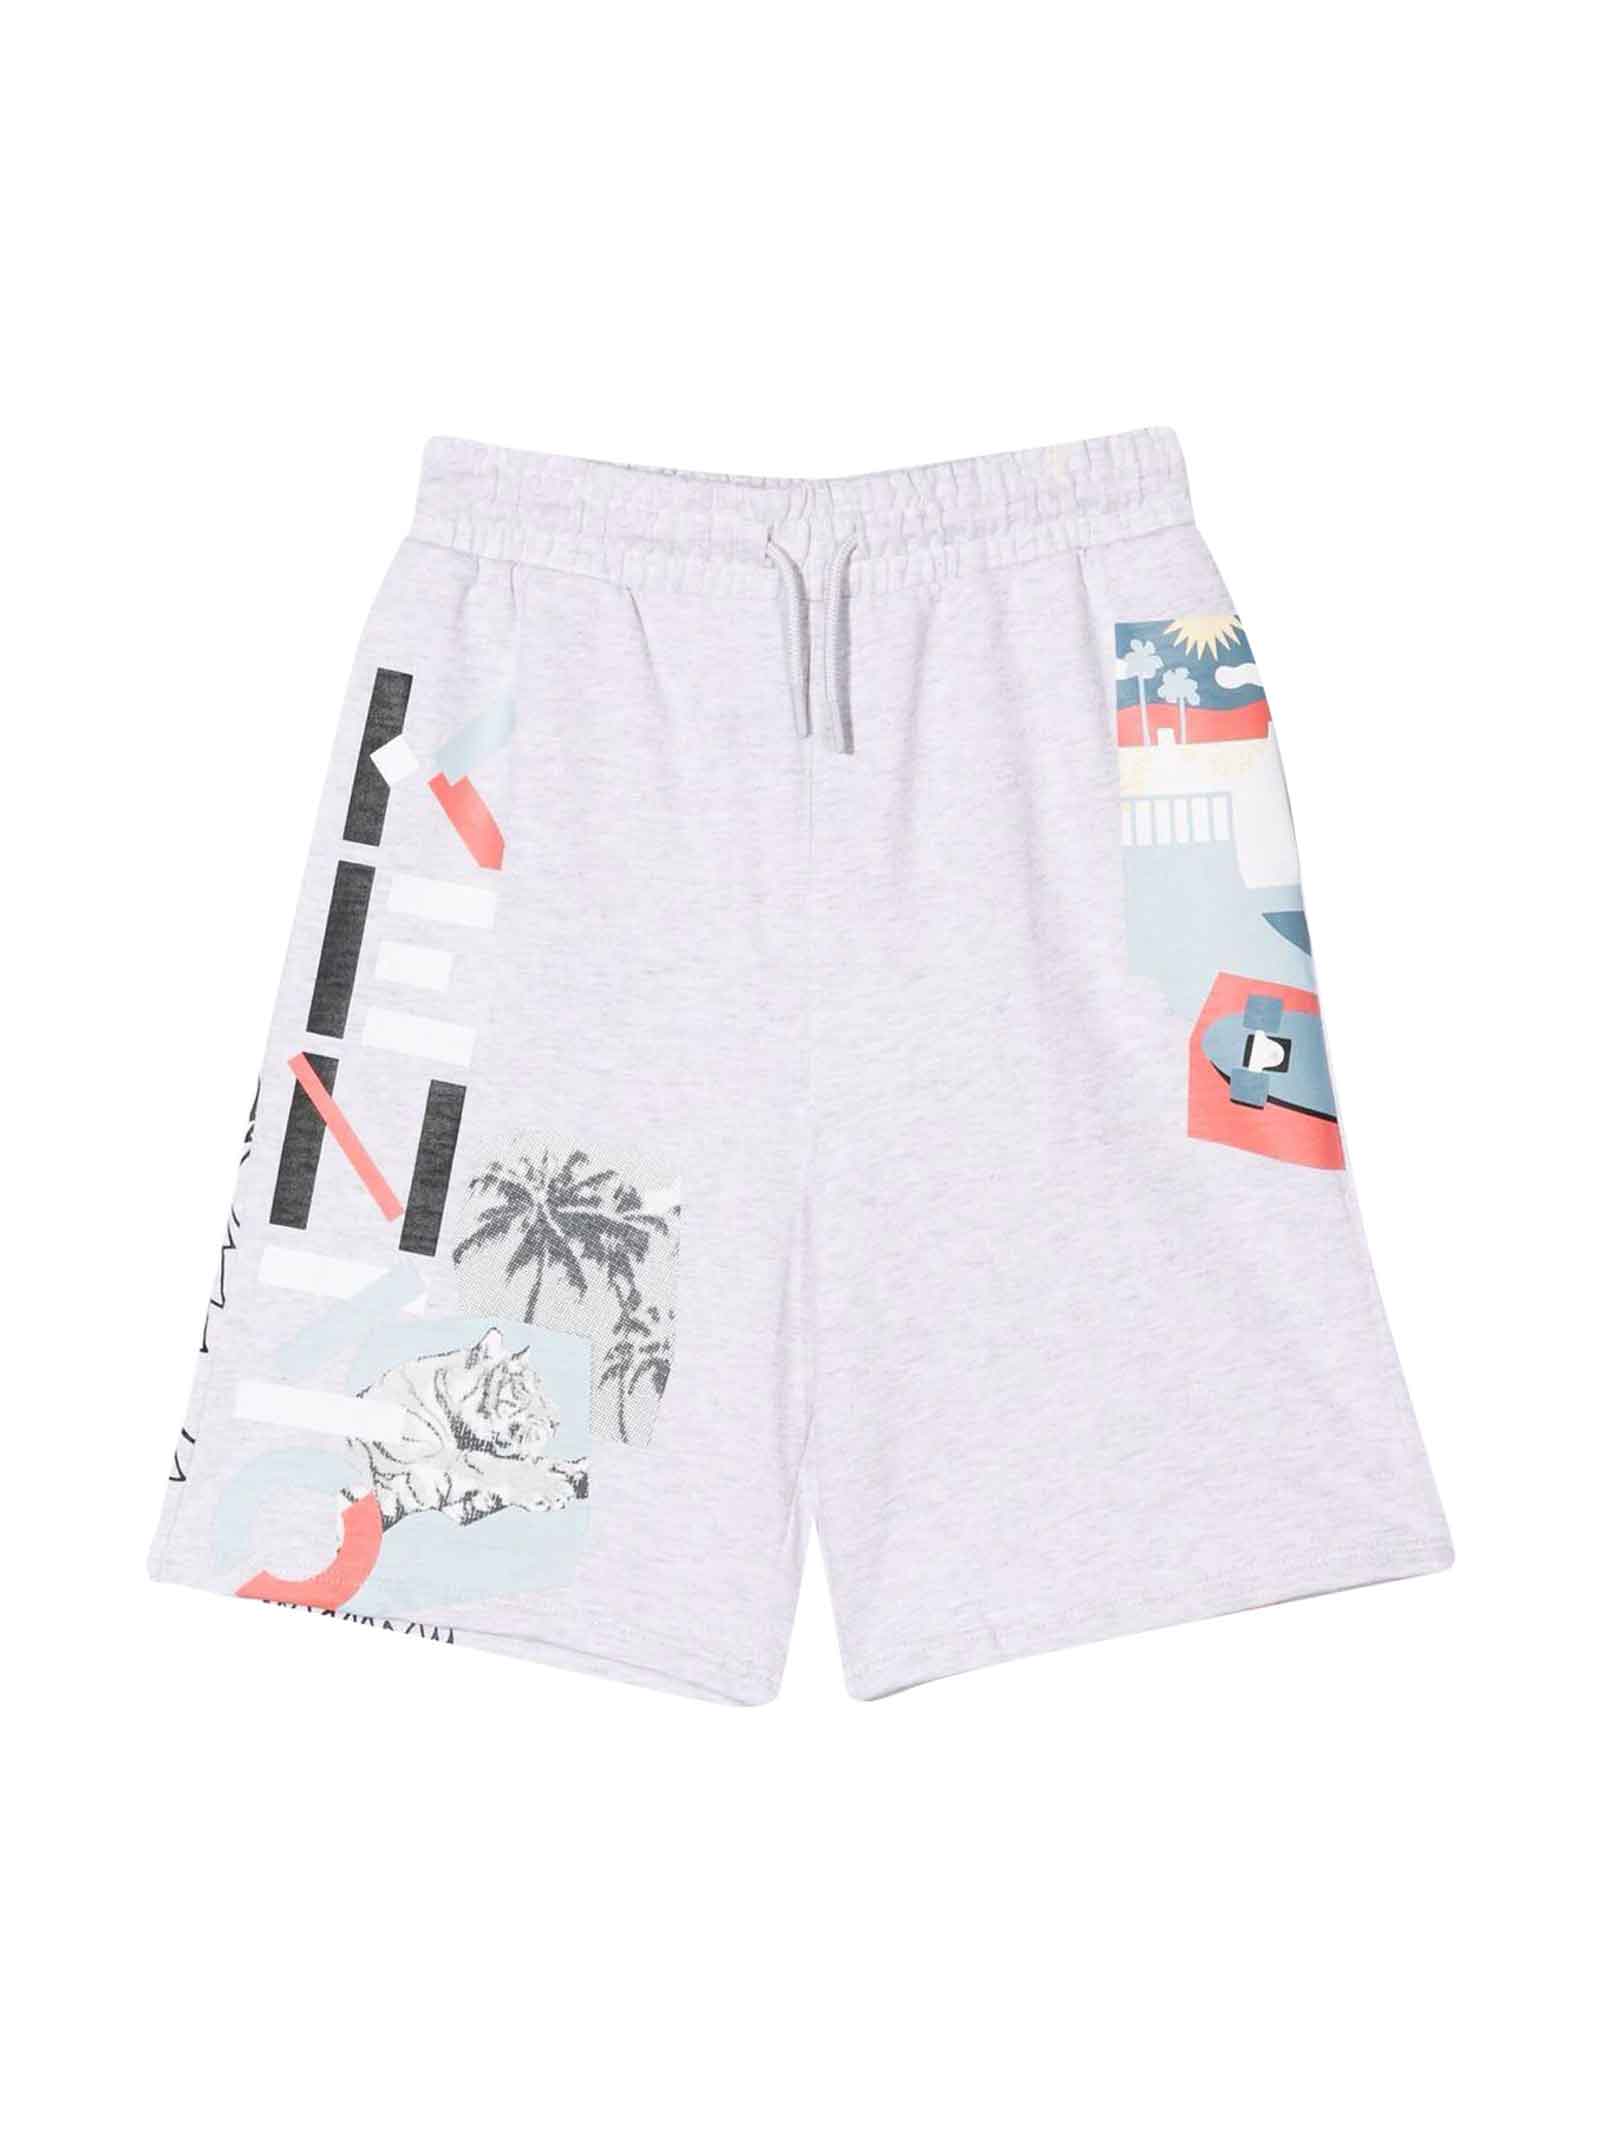 Kenzo Kids Boys Shorts Light Gray With Multicolor Logo Print On The Leg And Drawstring At The Elasticated Waist By.